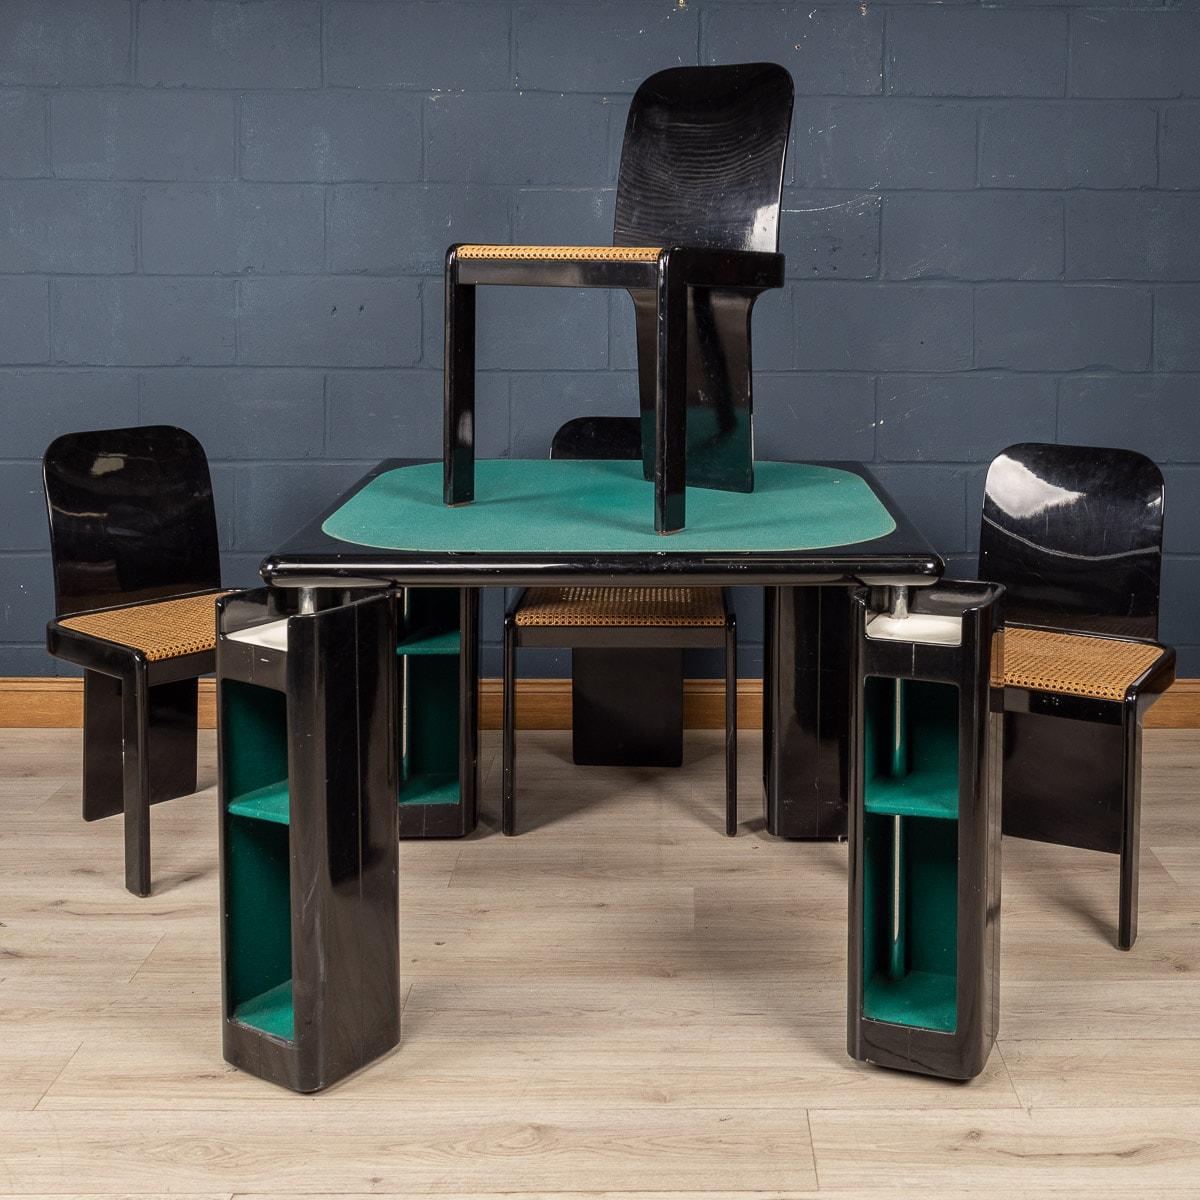 Italian Lacquered Wood Games Table & Chairs by Pierluigi Molinari for Pozzi, Milan